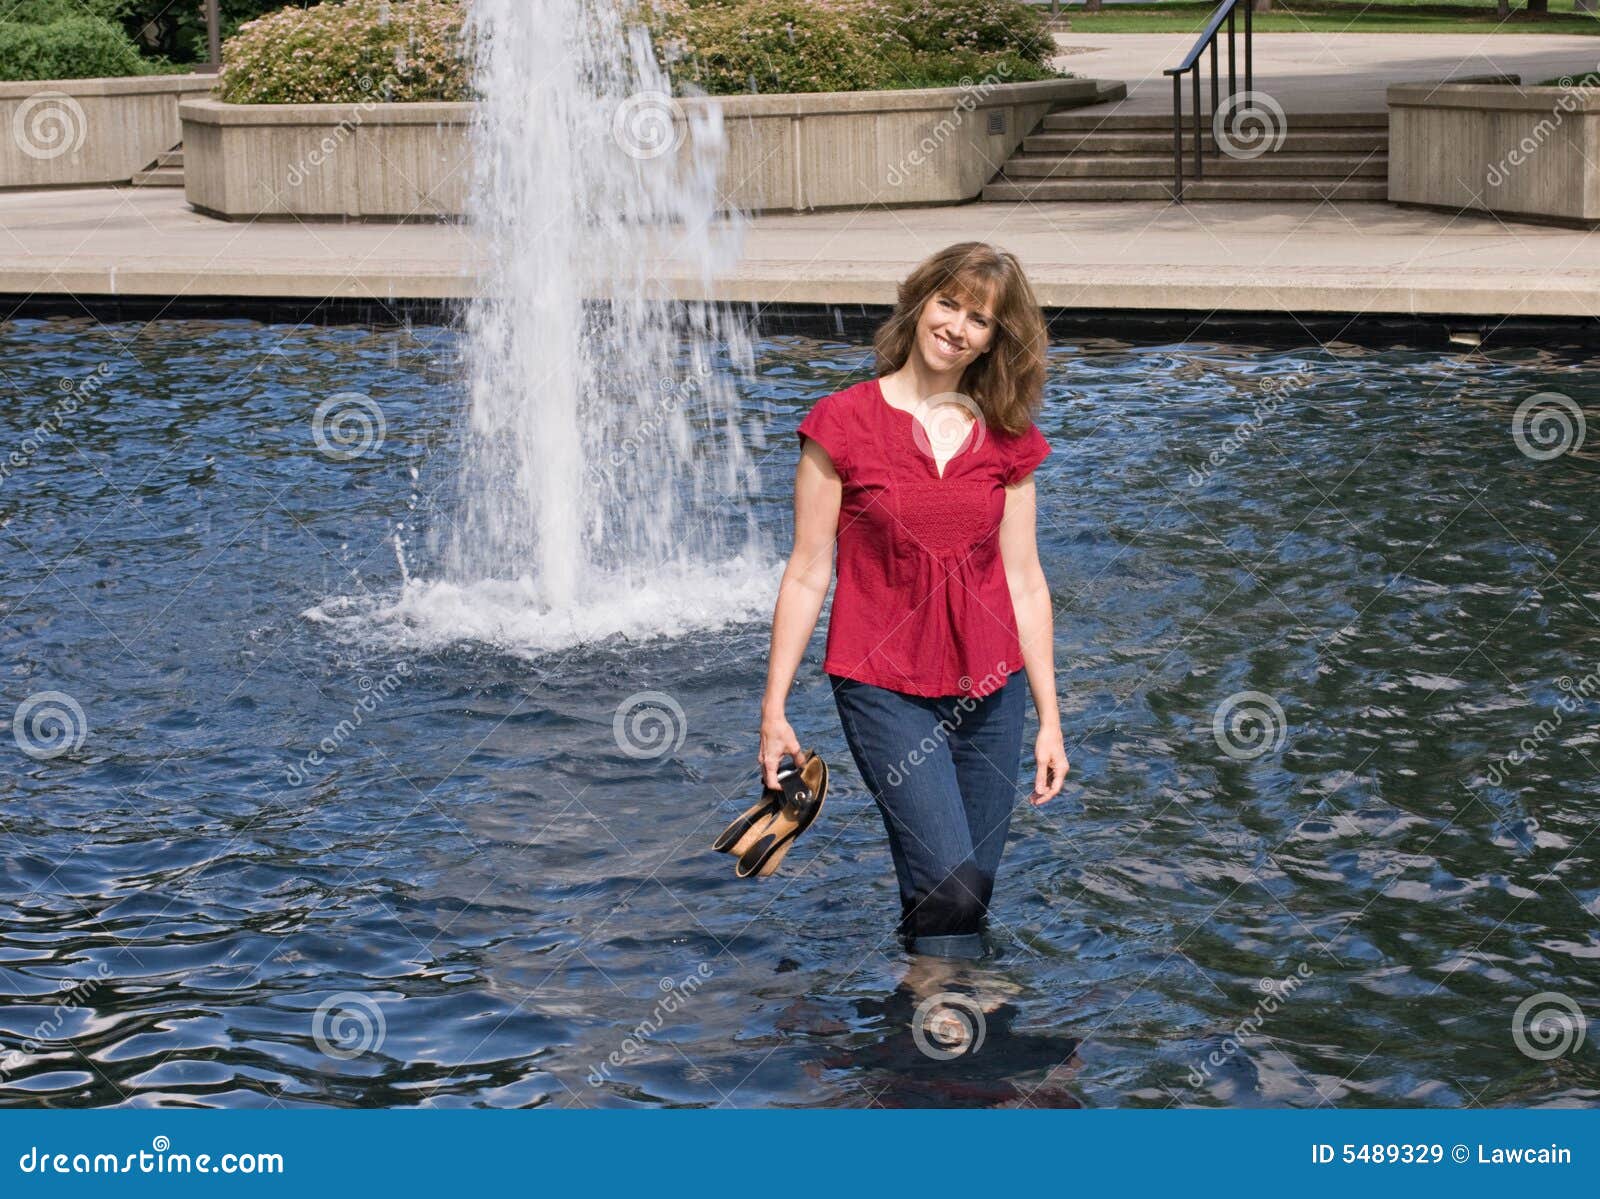 woman wading in pond